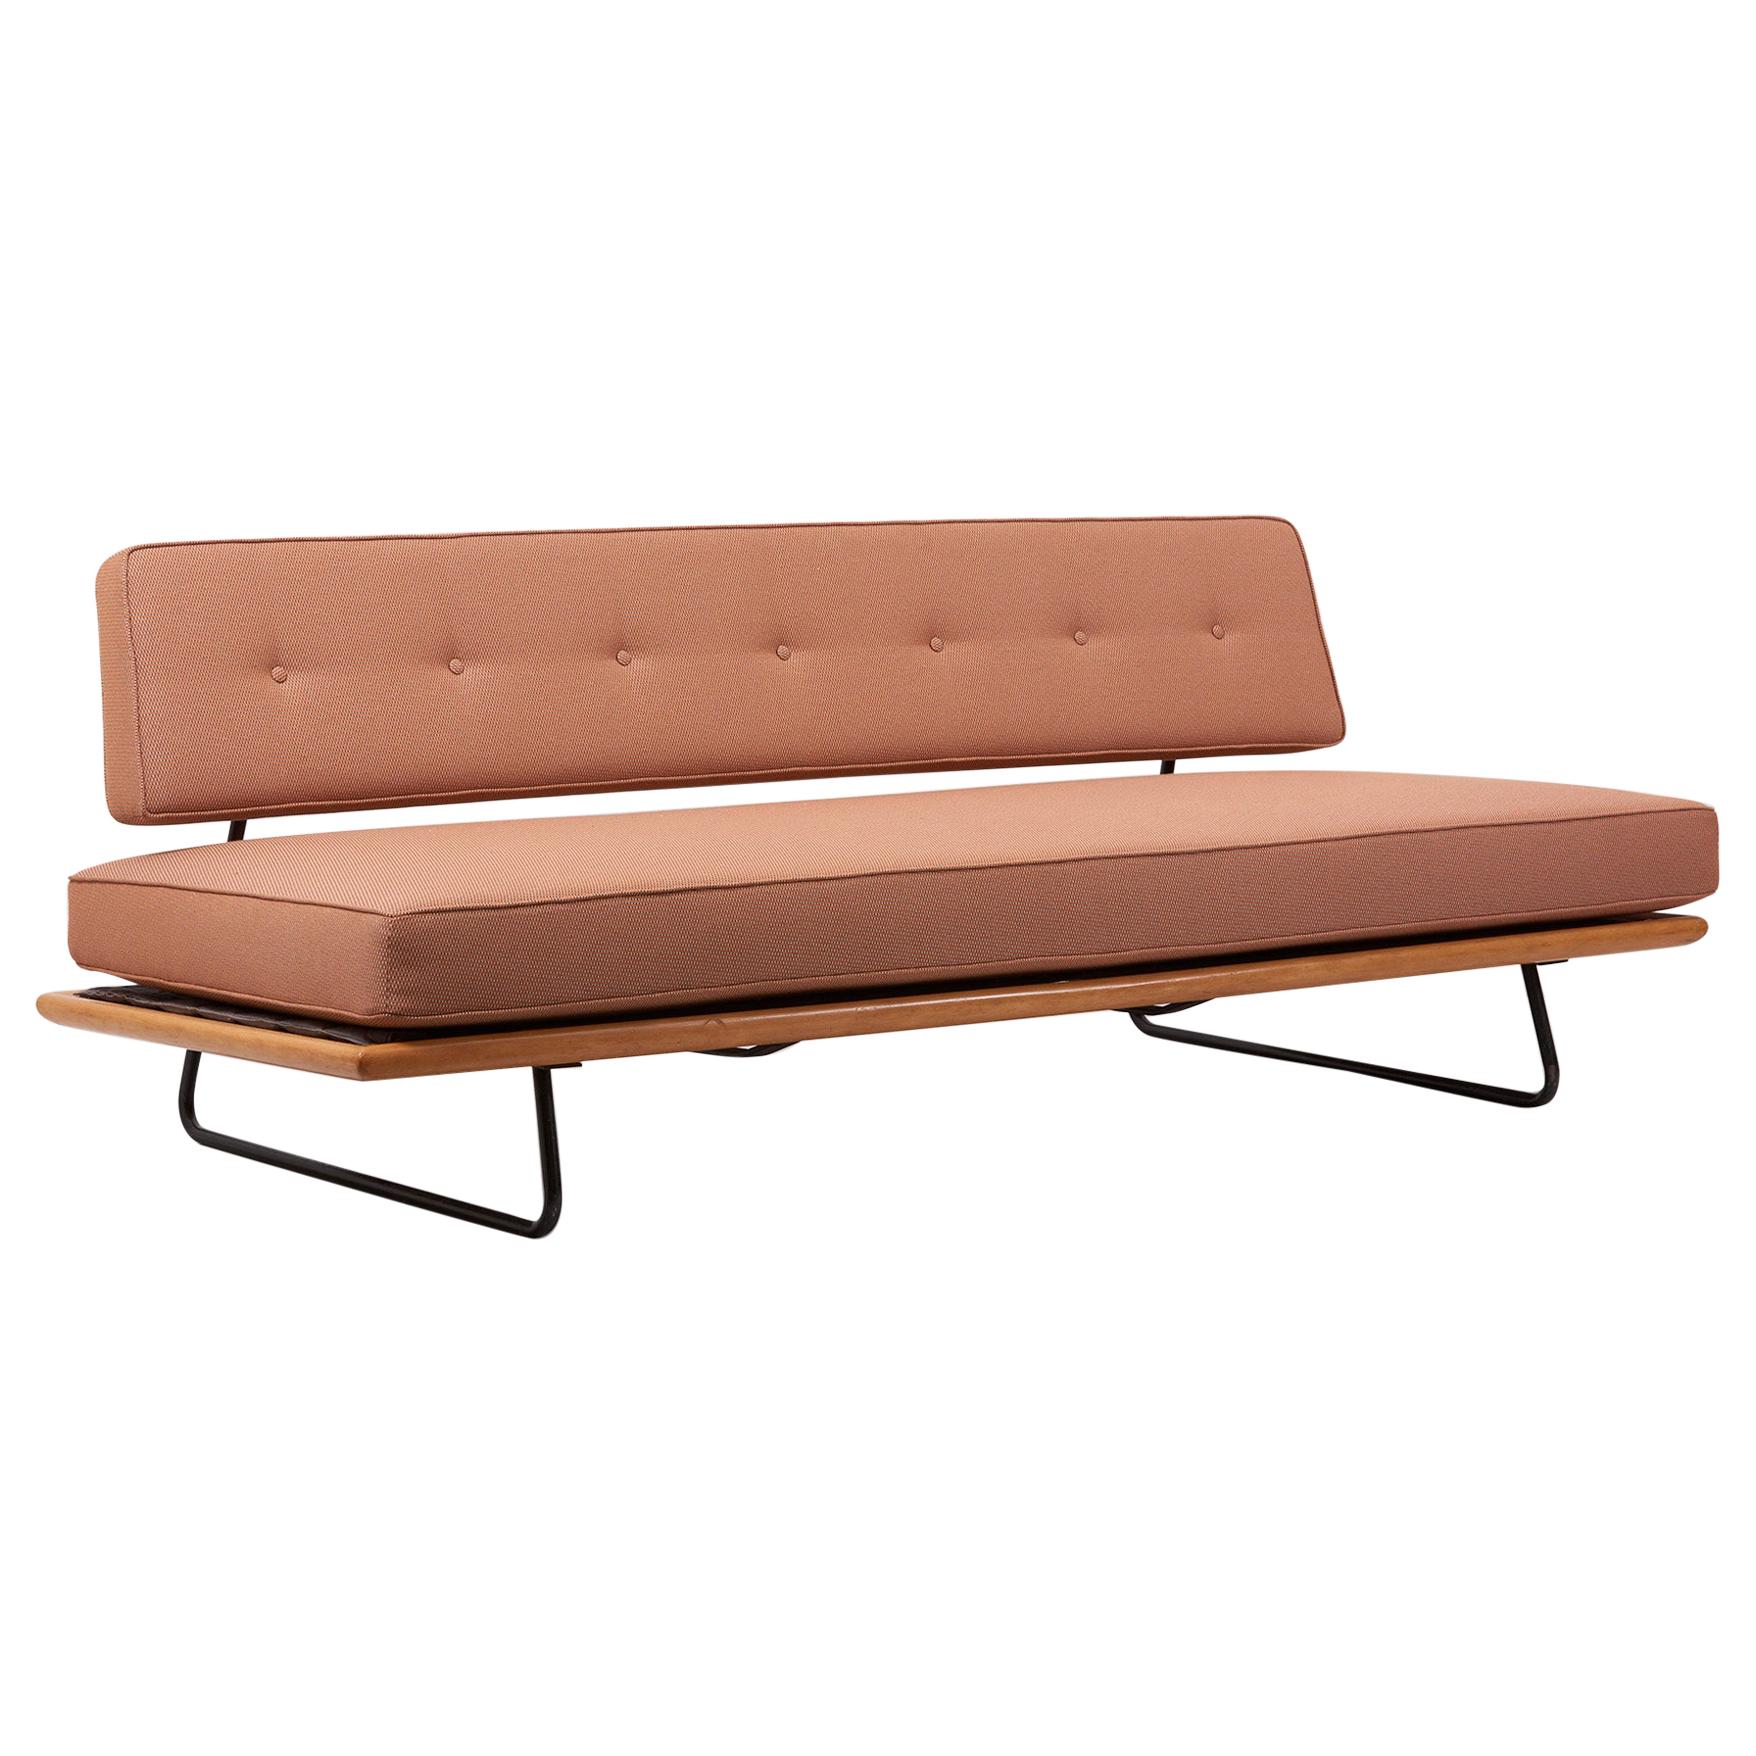 1950s Minimalist Daybed Rolf Grunow for Knoll, Beechwood & Metal, New Upholstery